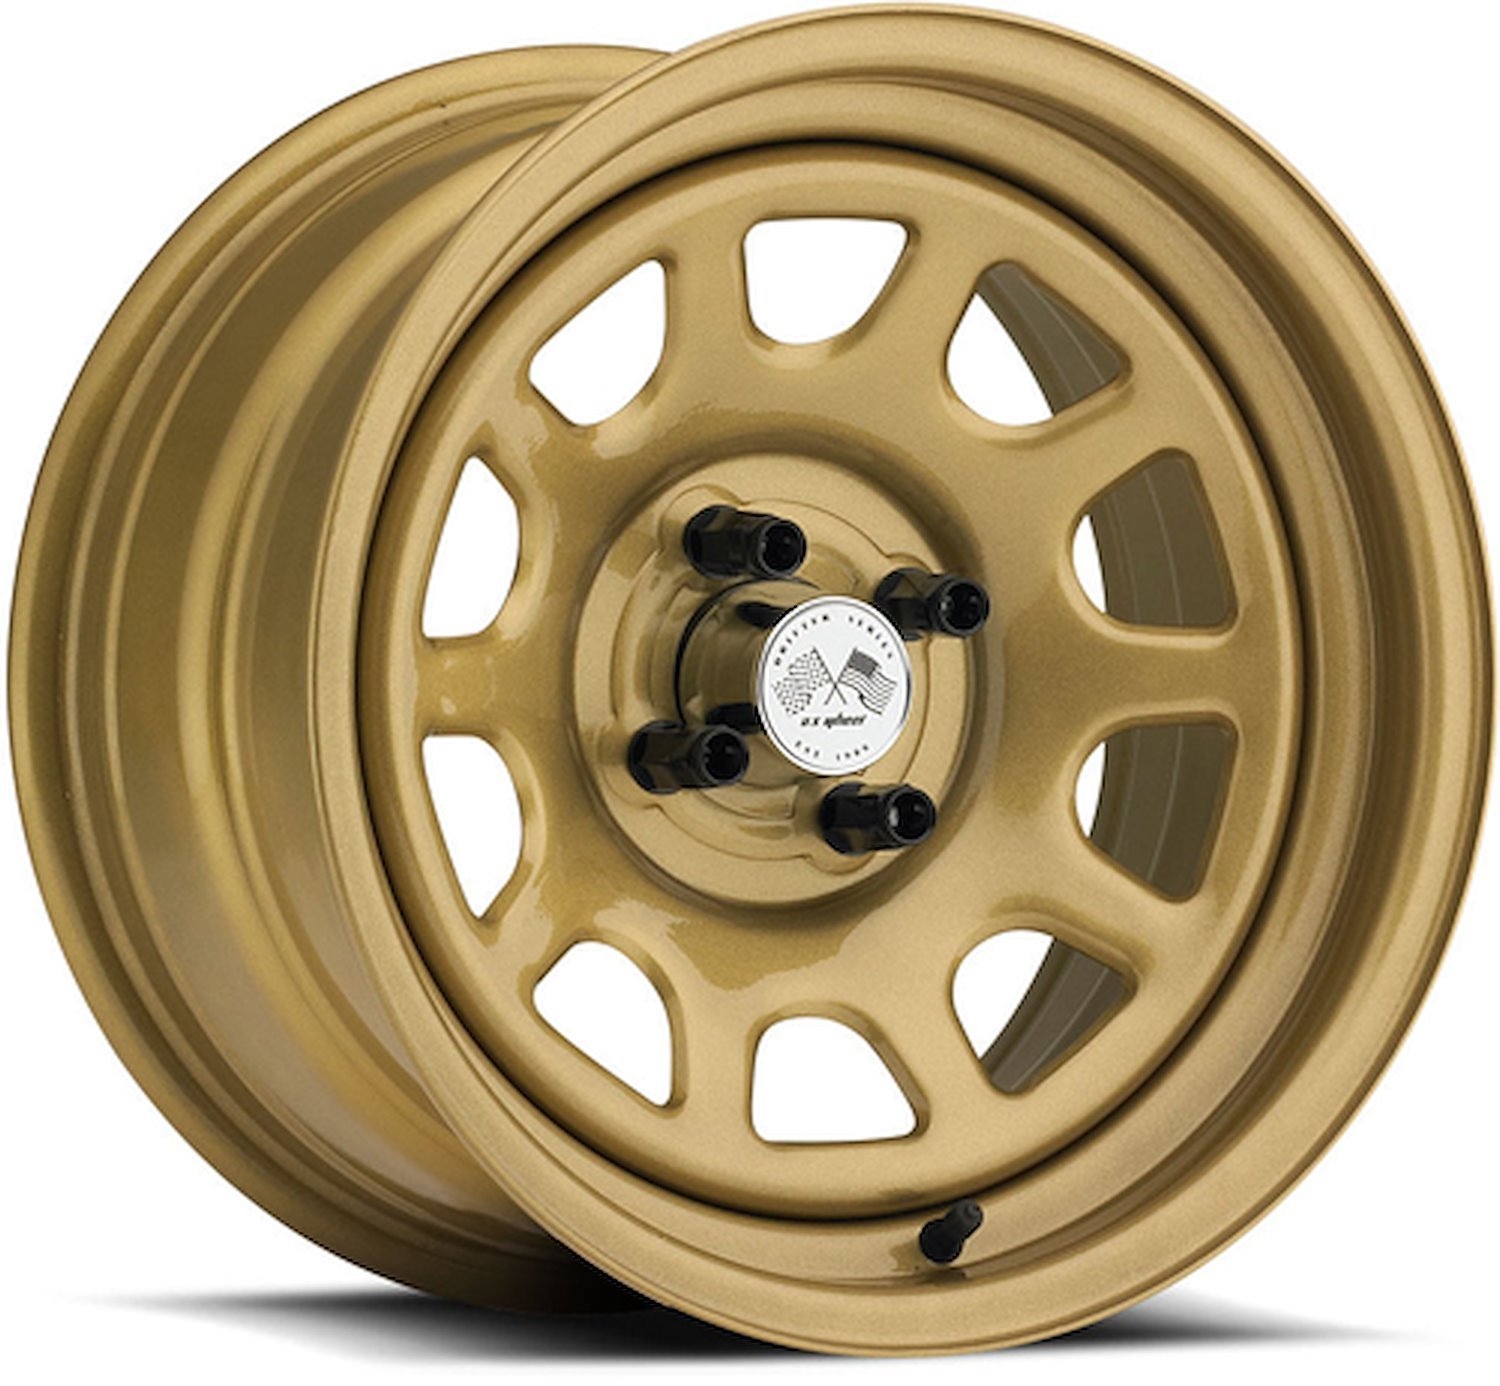 PAINTED DAYTONA FWD DRIFTER GOLD 15 x 8 4 x 45 Bolt Circle 45 Back Spacing 0 offset 266 Center Bore 1400 lbs Load Rating